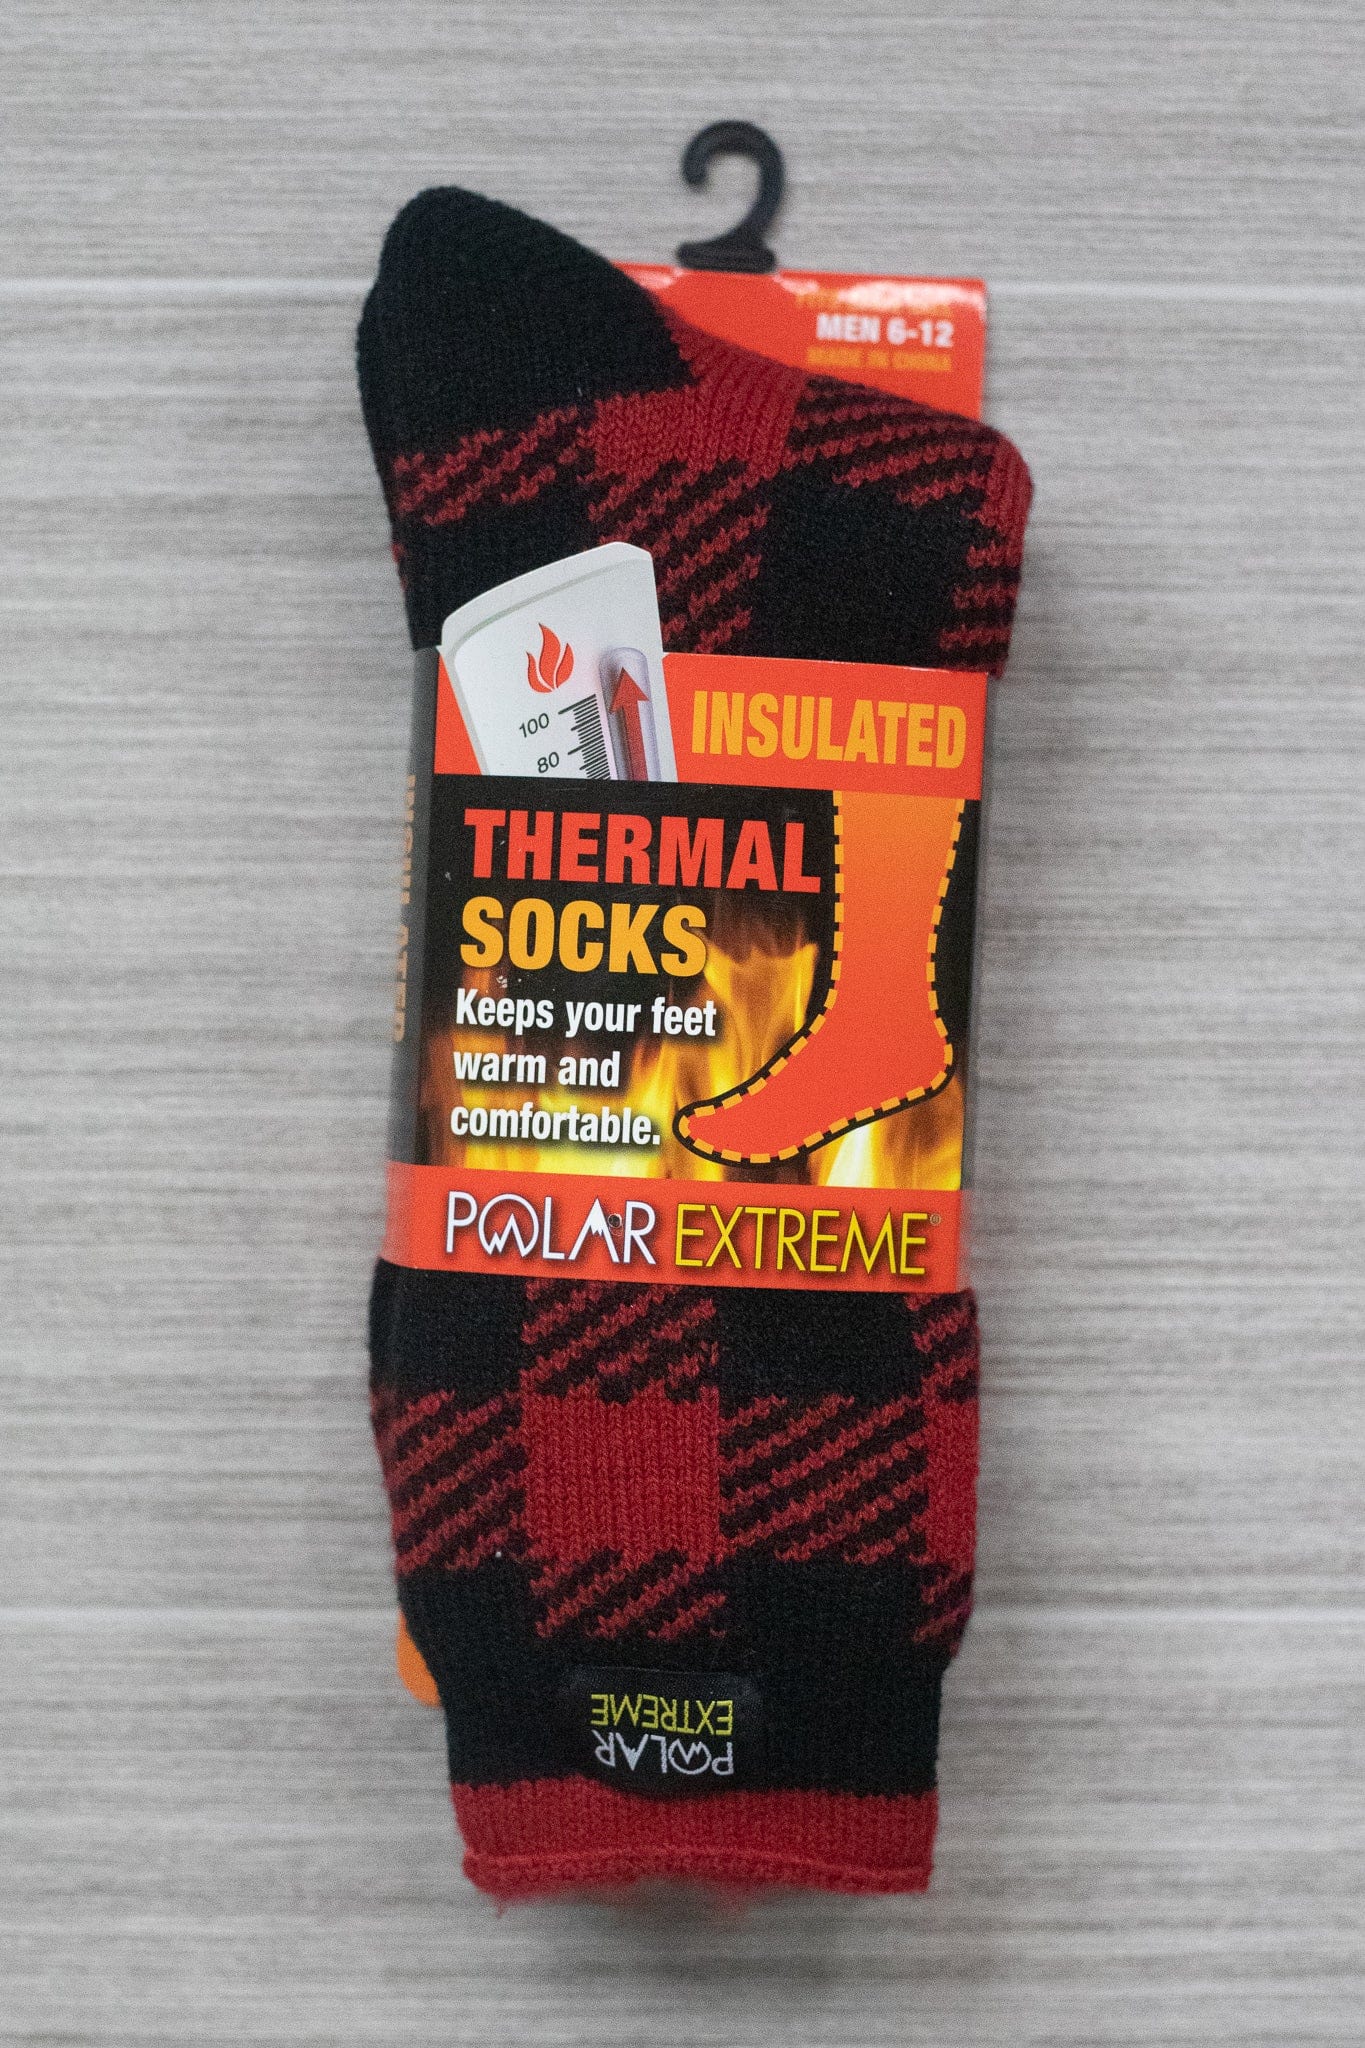 Polar Extreme Insulated Thermal Socks Women Fits Shoe Size 5-9 NEW 2 Pack